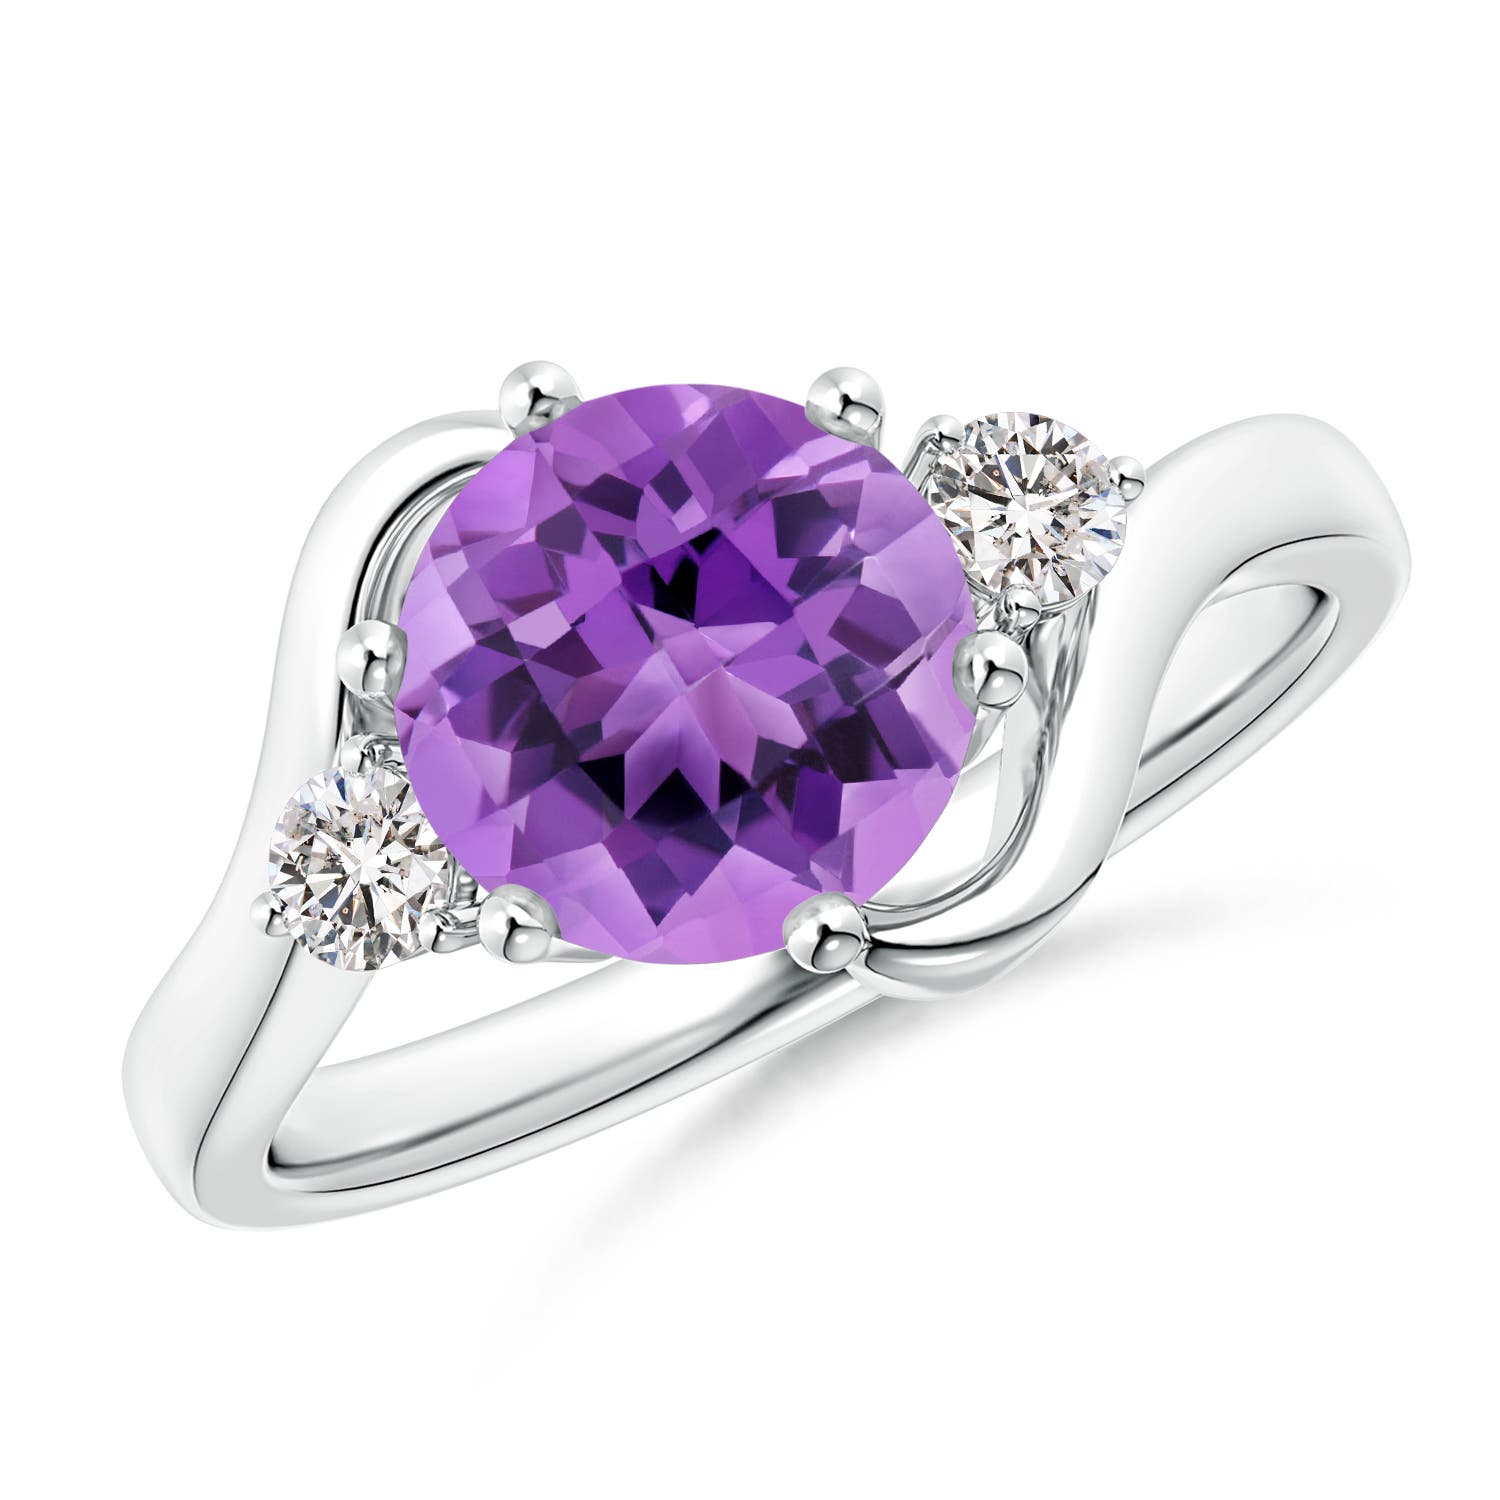 AA - Amethyst / 1.84 CT / 14 KT White Gold